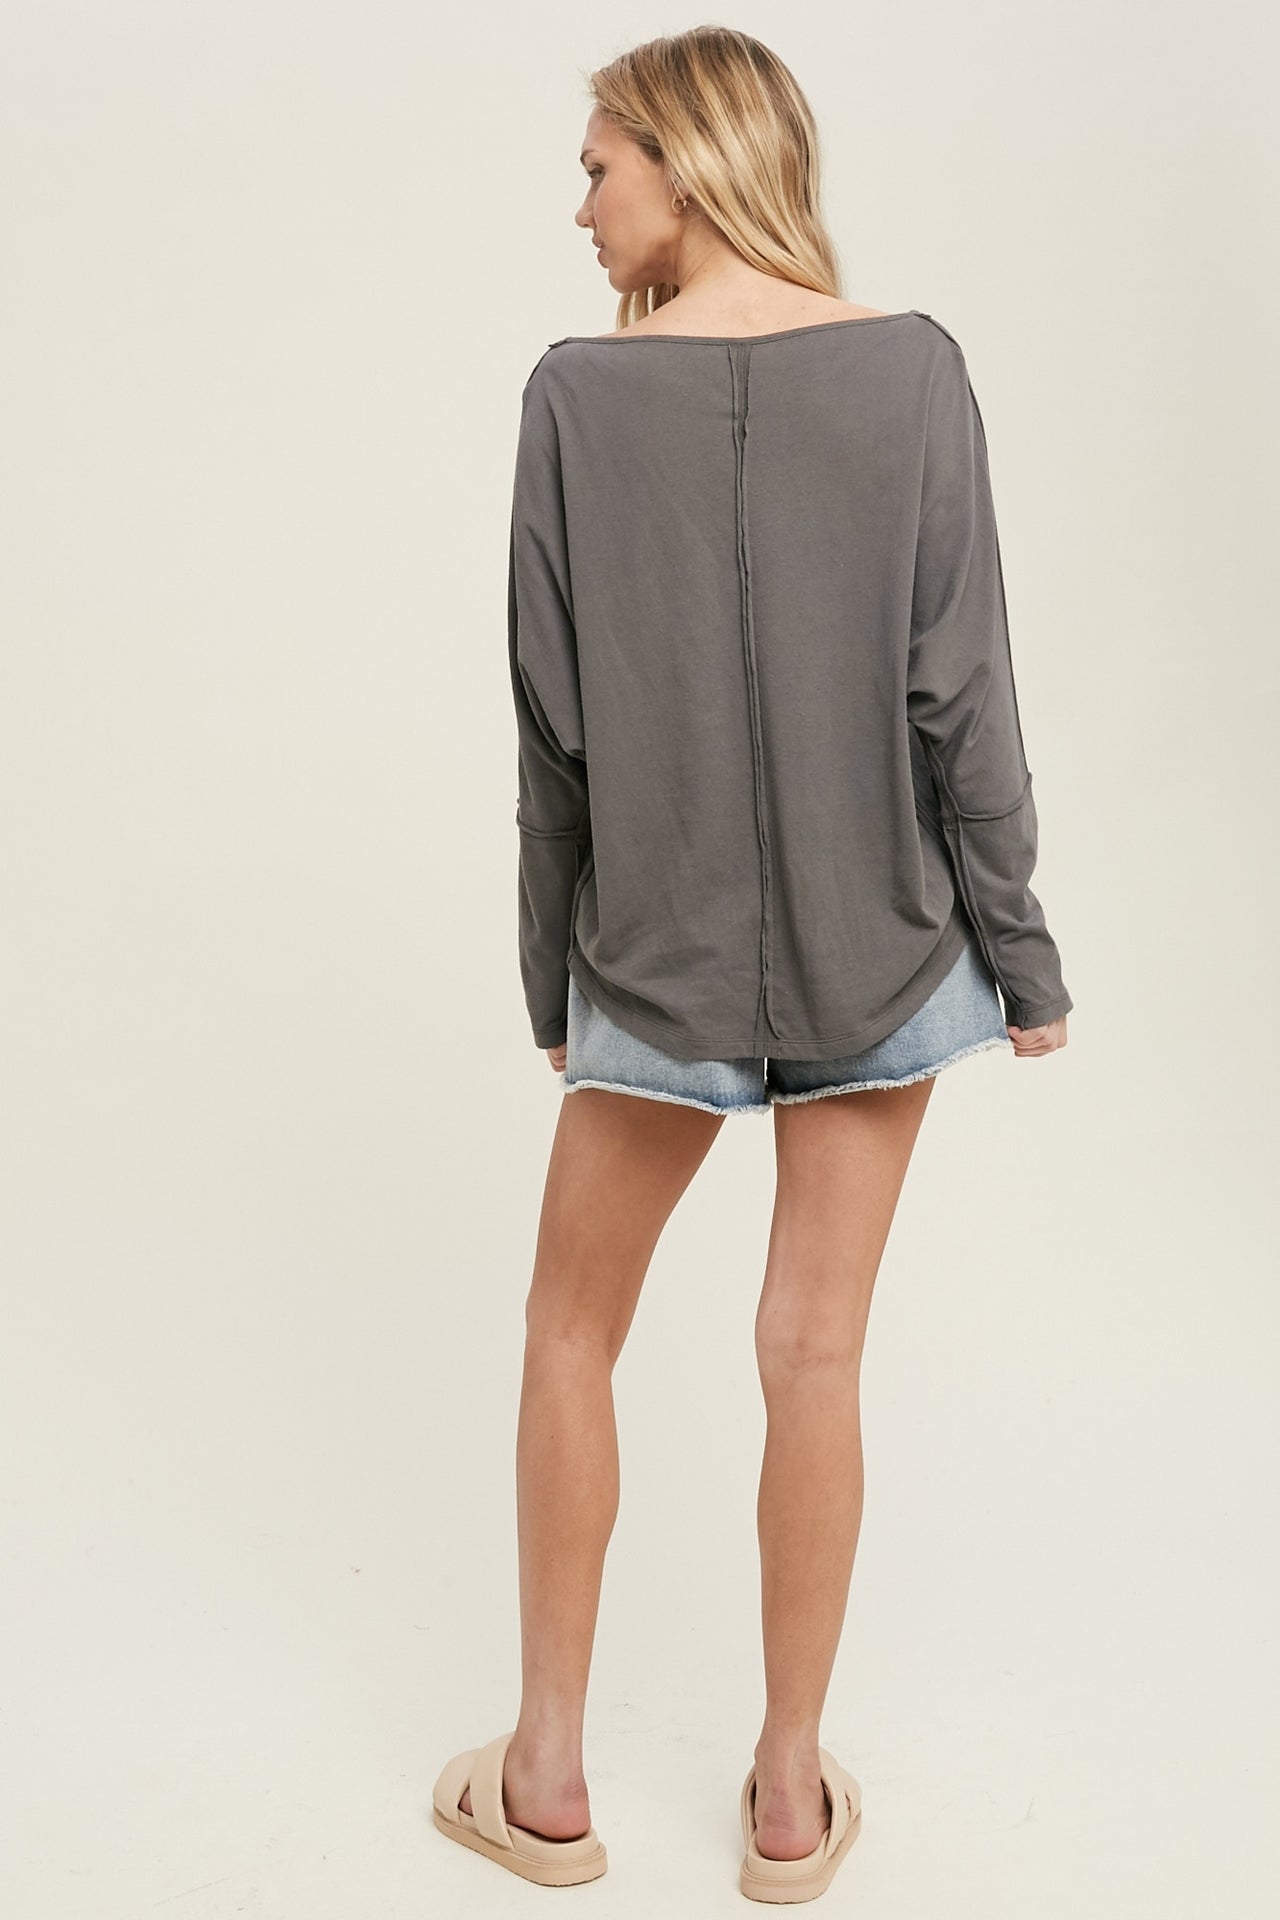 WISHLIST BOAT NECK KNIT TOP WITH RAW EDGE DETAIL